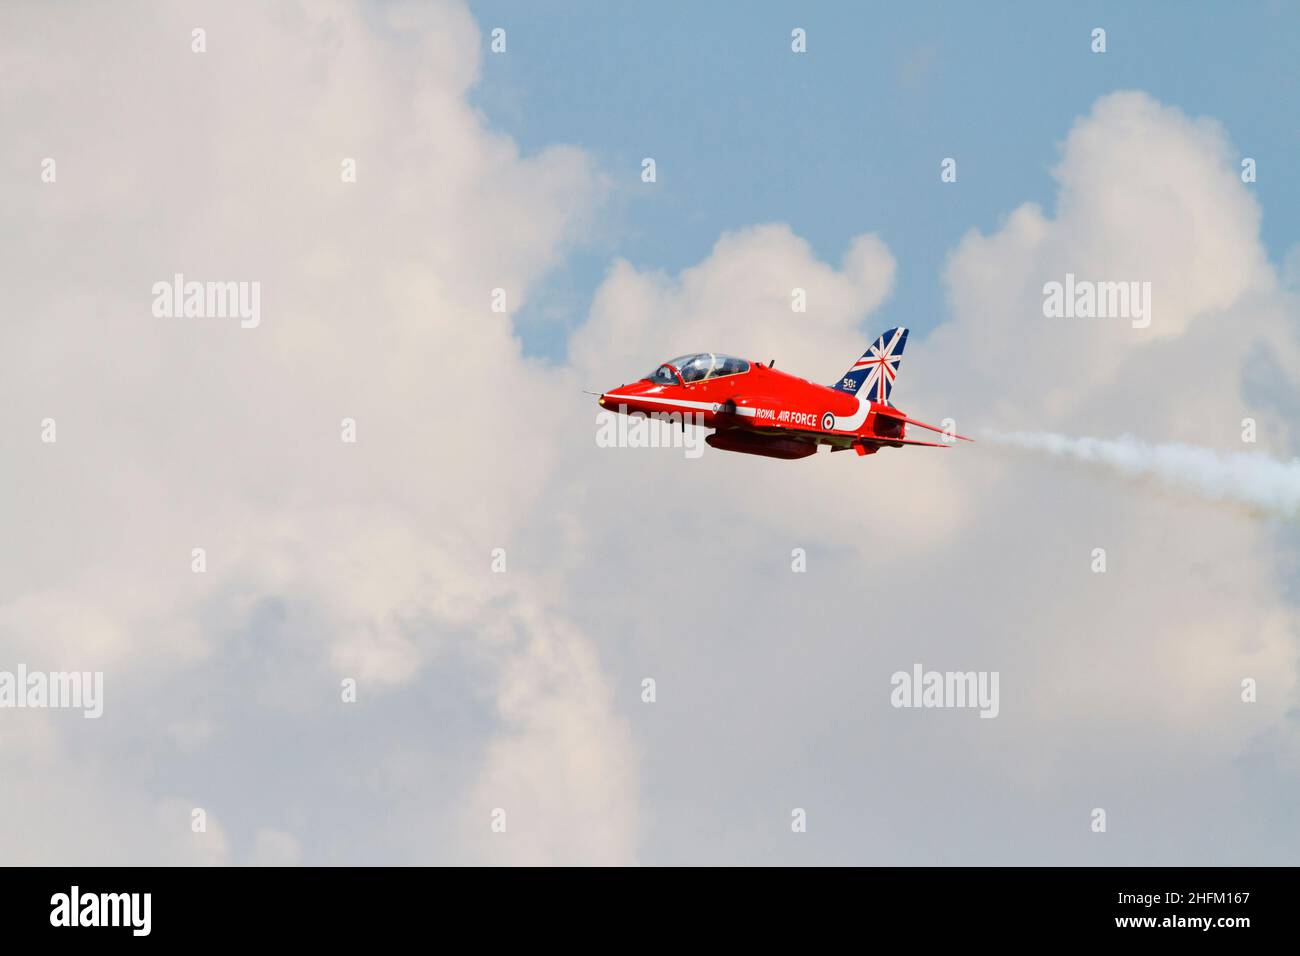 Single synchro pair BAE Hawk T1a aircraft of the Royal Air Force aerobatic display team, The Red Arrows, with the 50th Anniversity tail markings. . RA Stock Photo